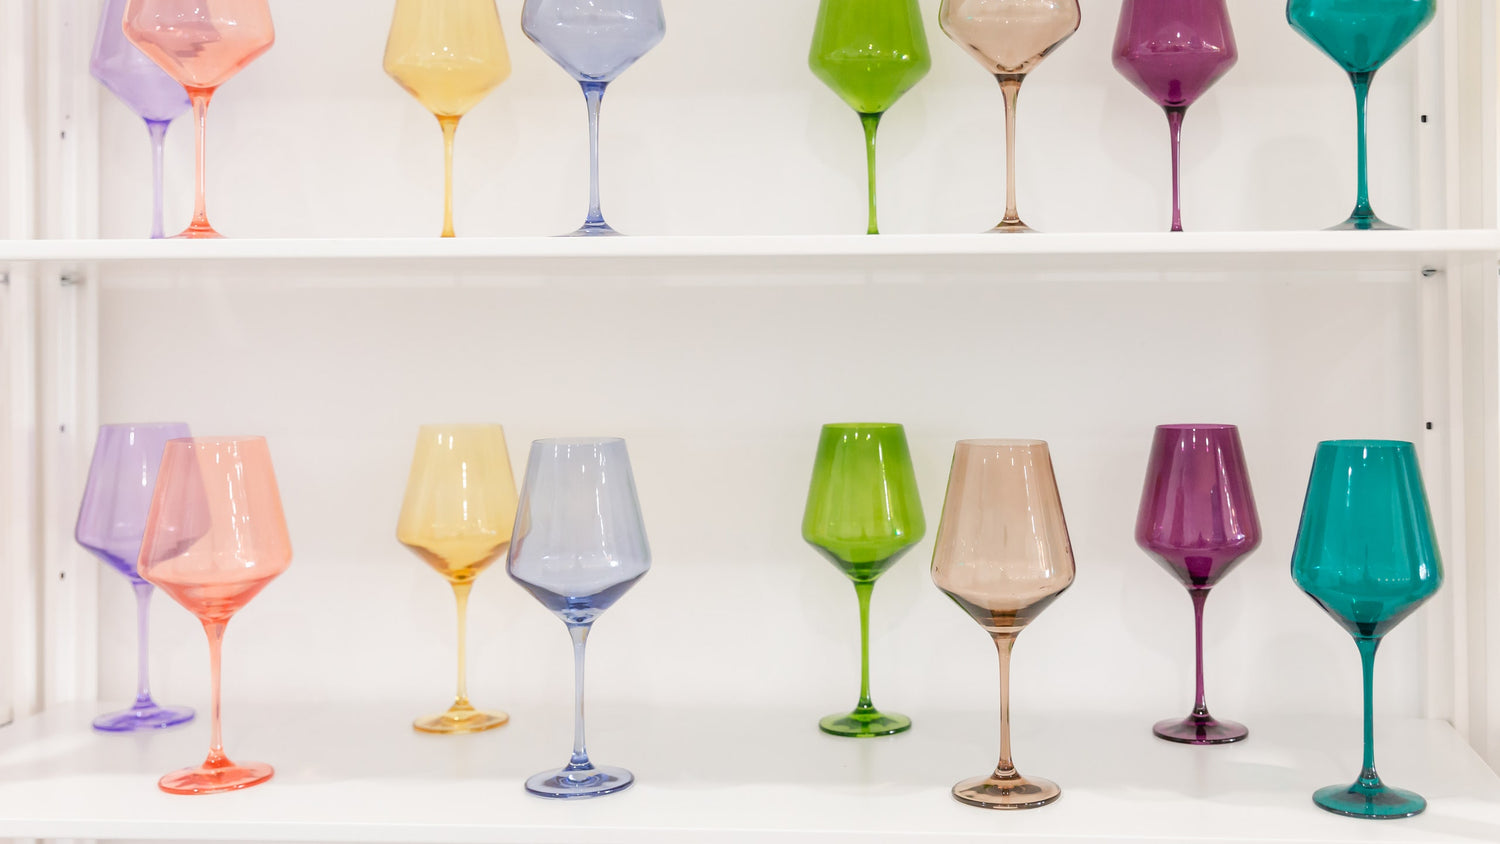 Architectural Digest: The Pastel Glassware You Need This Summer